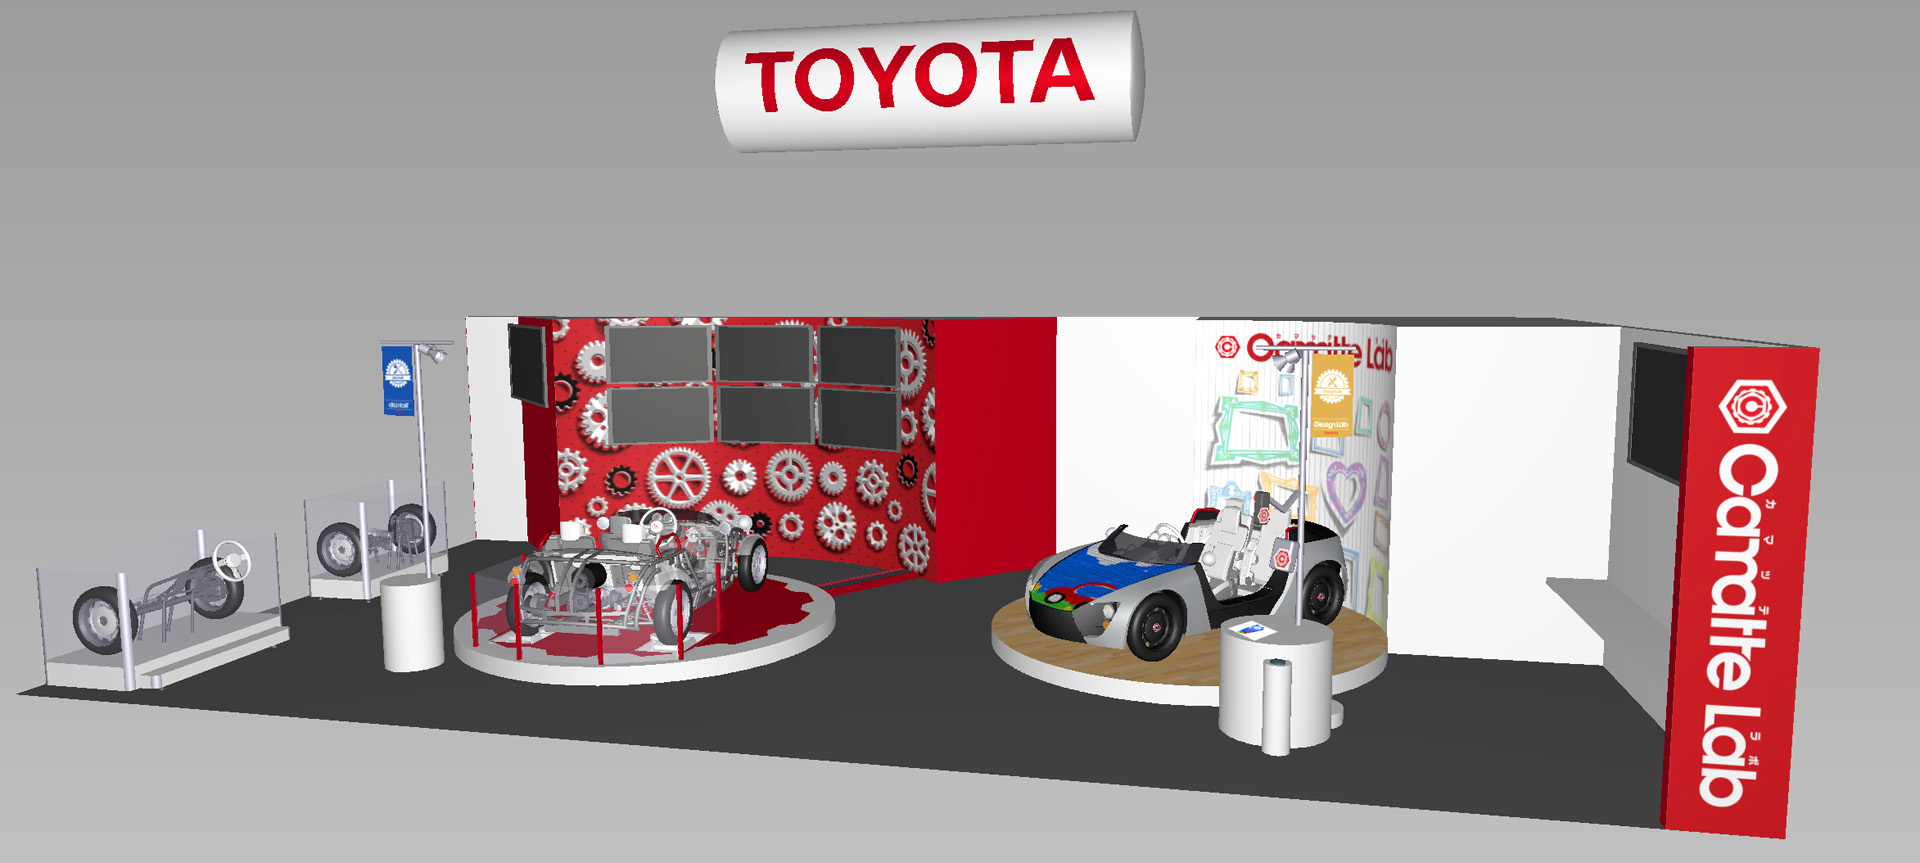 Toyota's booth at the International Tokyo Toy Show Toyota Motor